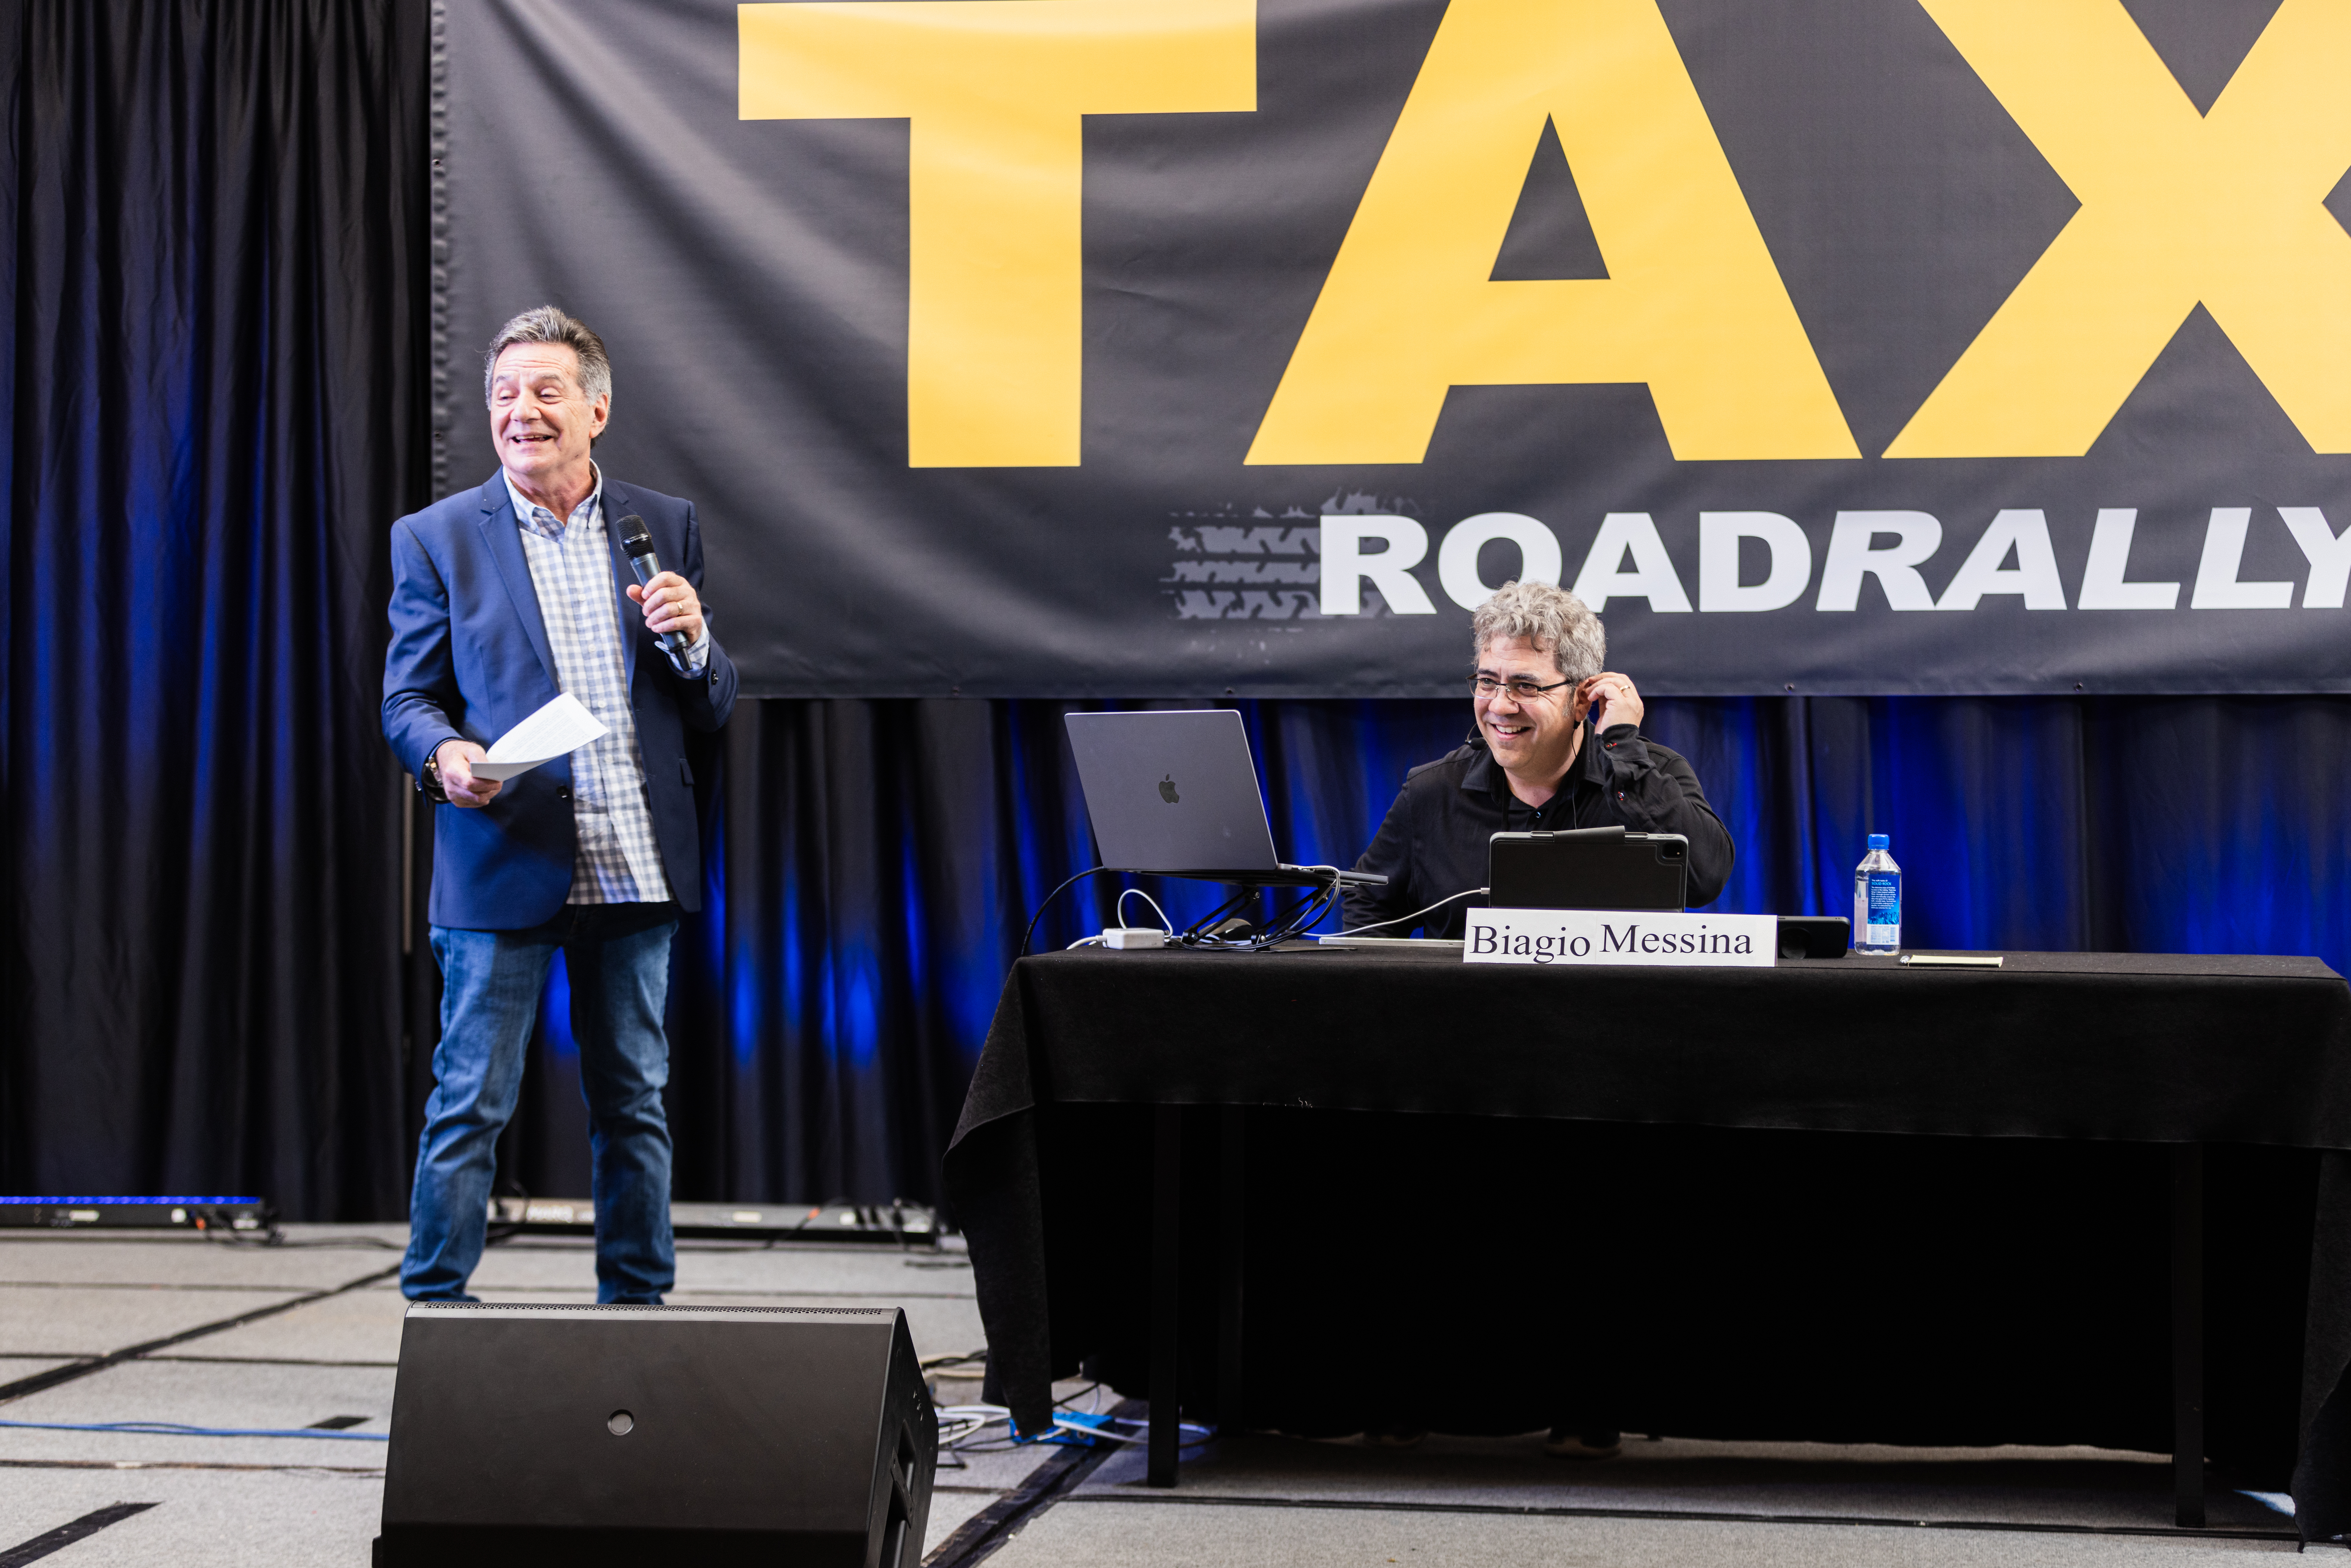 TAXI CEO, Michael Laskow introduces TV Producer, Biagio Messina who proceeded to blow the audience away during his panel titled, How to Make Your TV Music Much More Usable. 